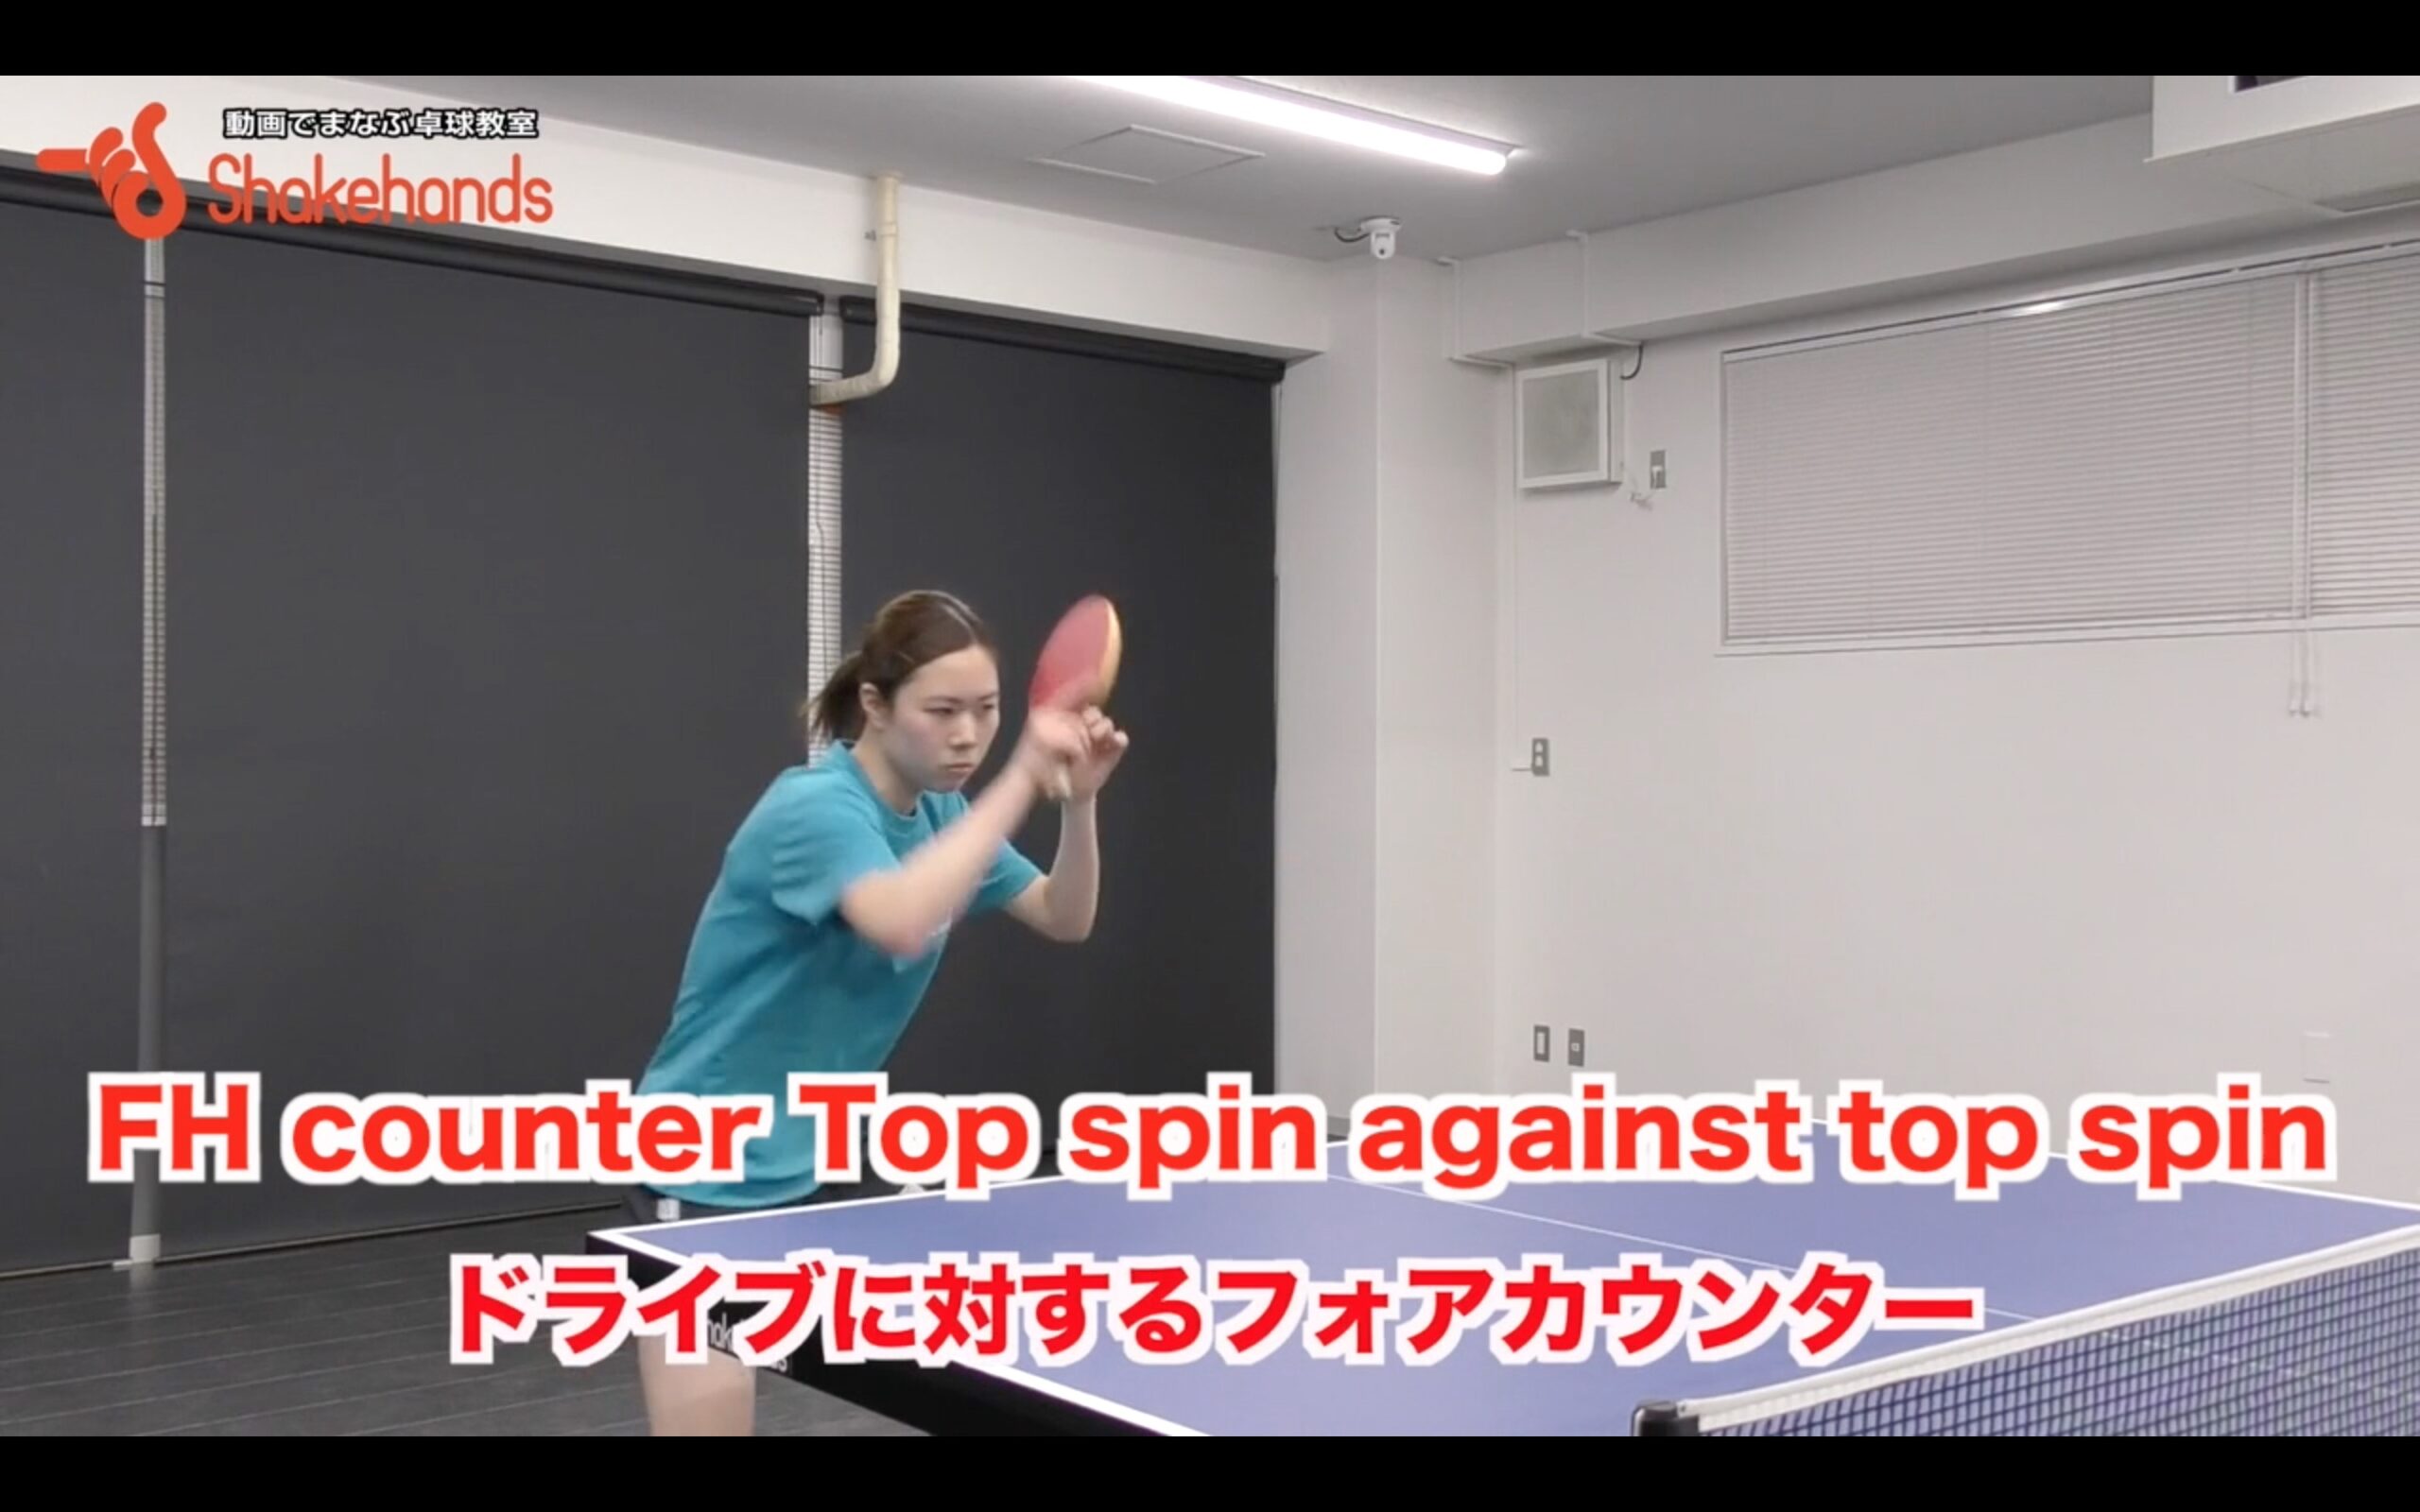 FH counter top spin against top spin